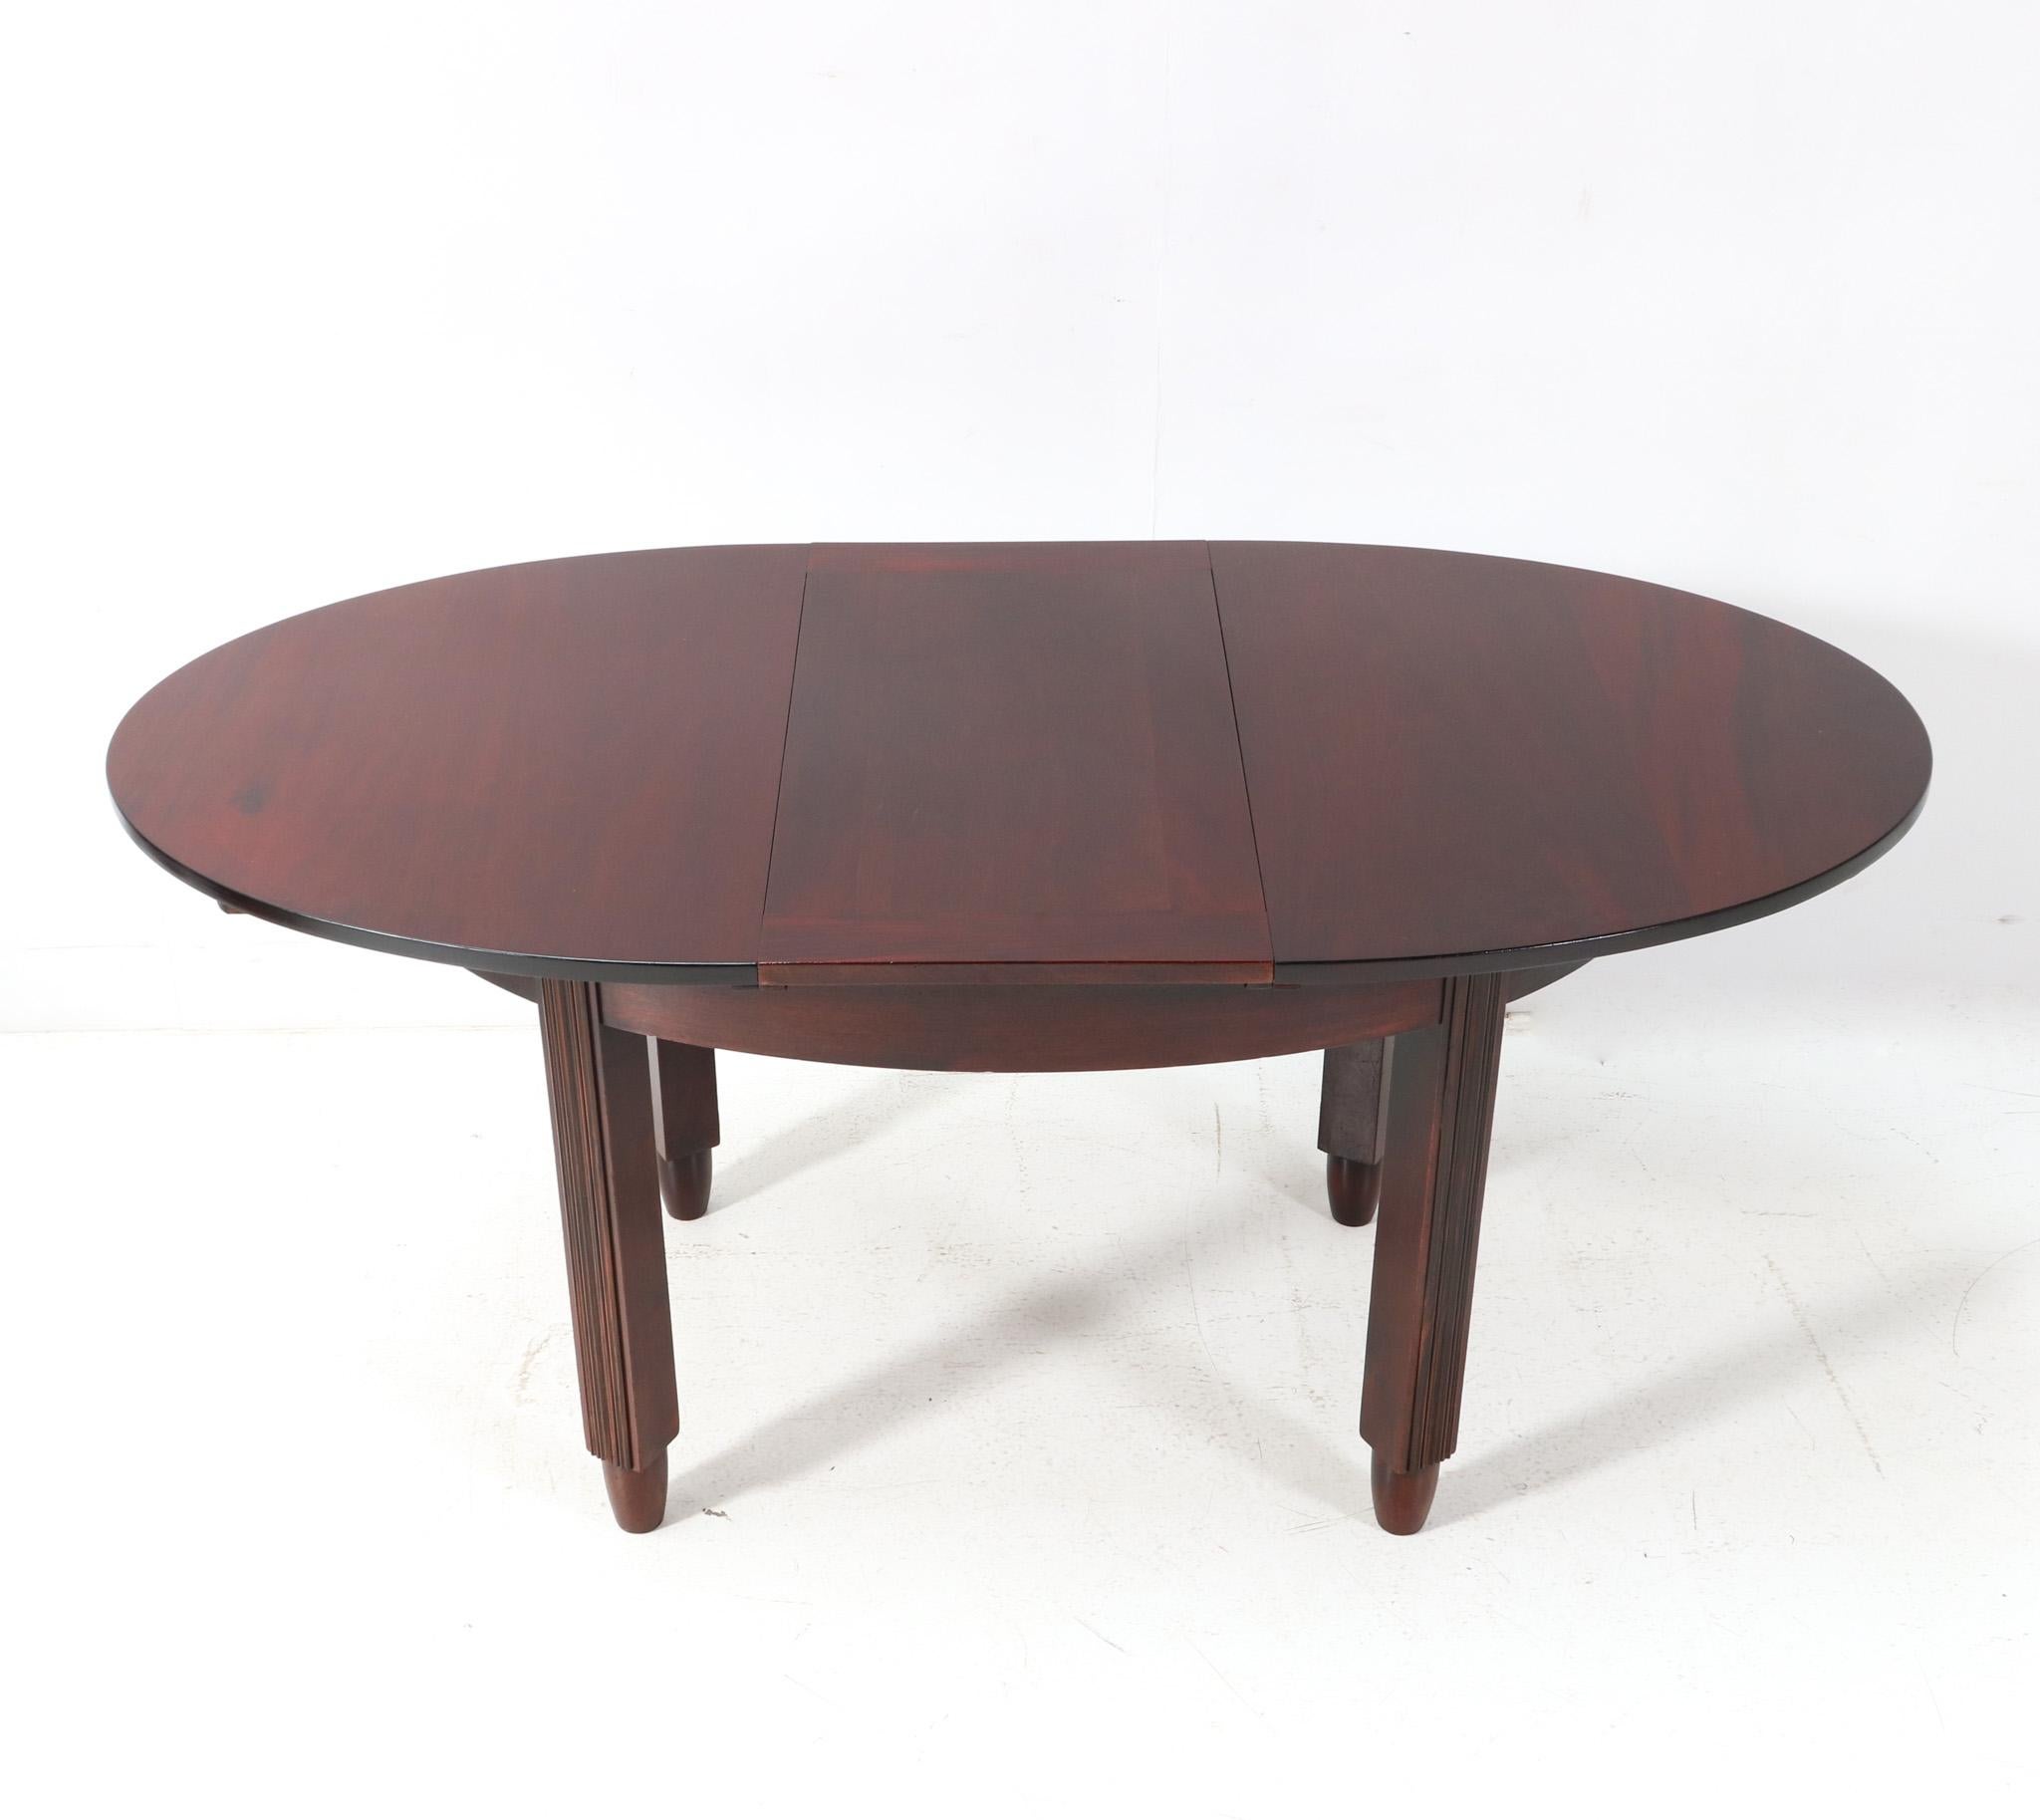 Early 20th Century Walnut Art Deco Amsterdamse School Extendable Dining Room Table by Fa. Drilling For Sale